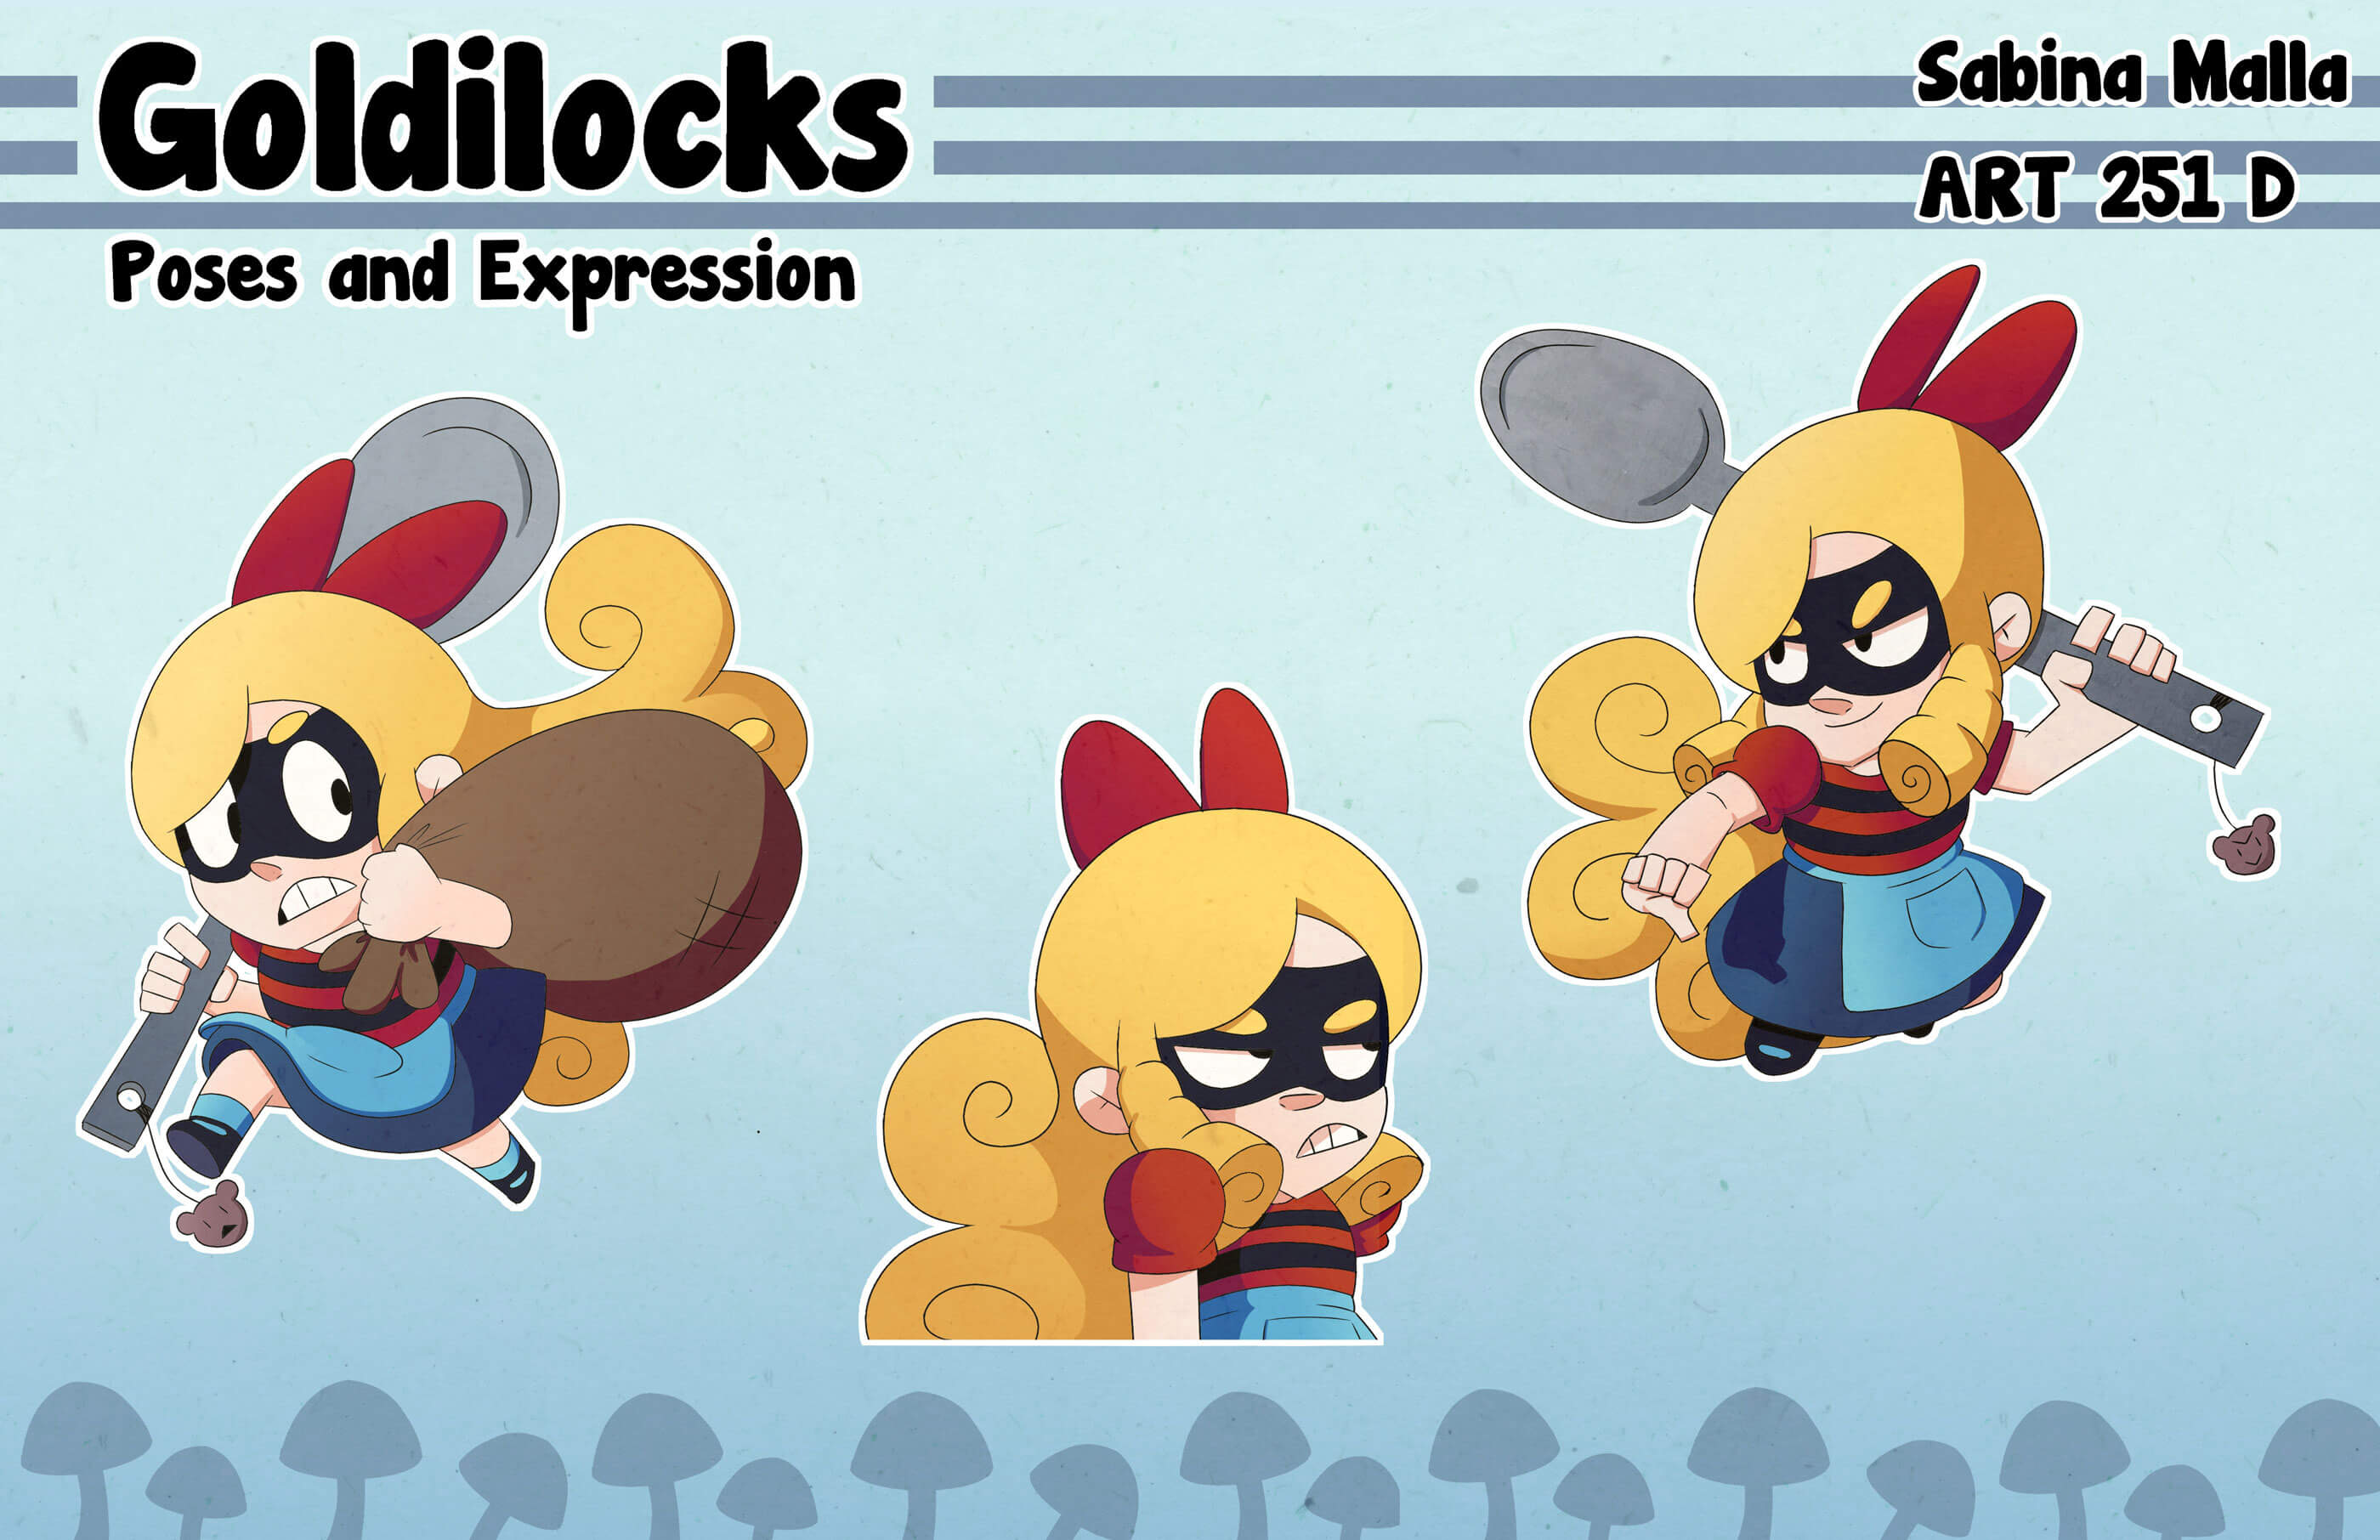 A character concept of a mischievous version of Goldilocks.